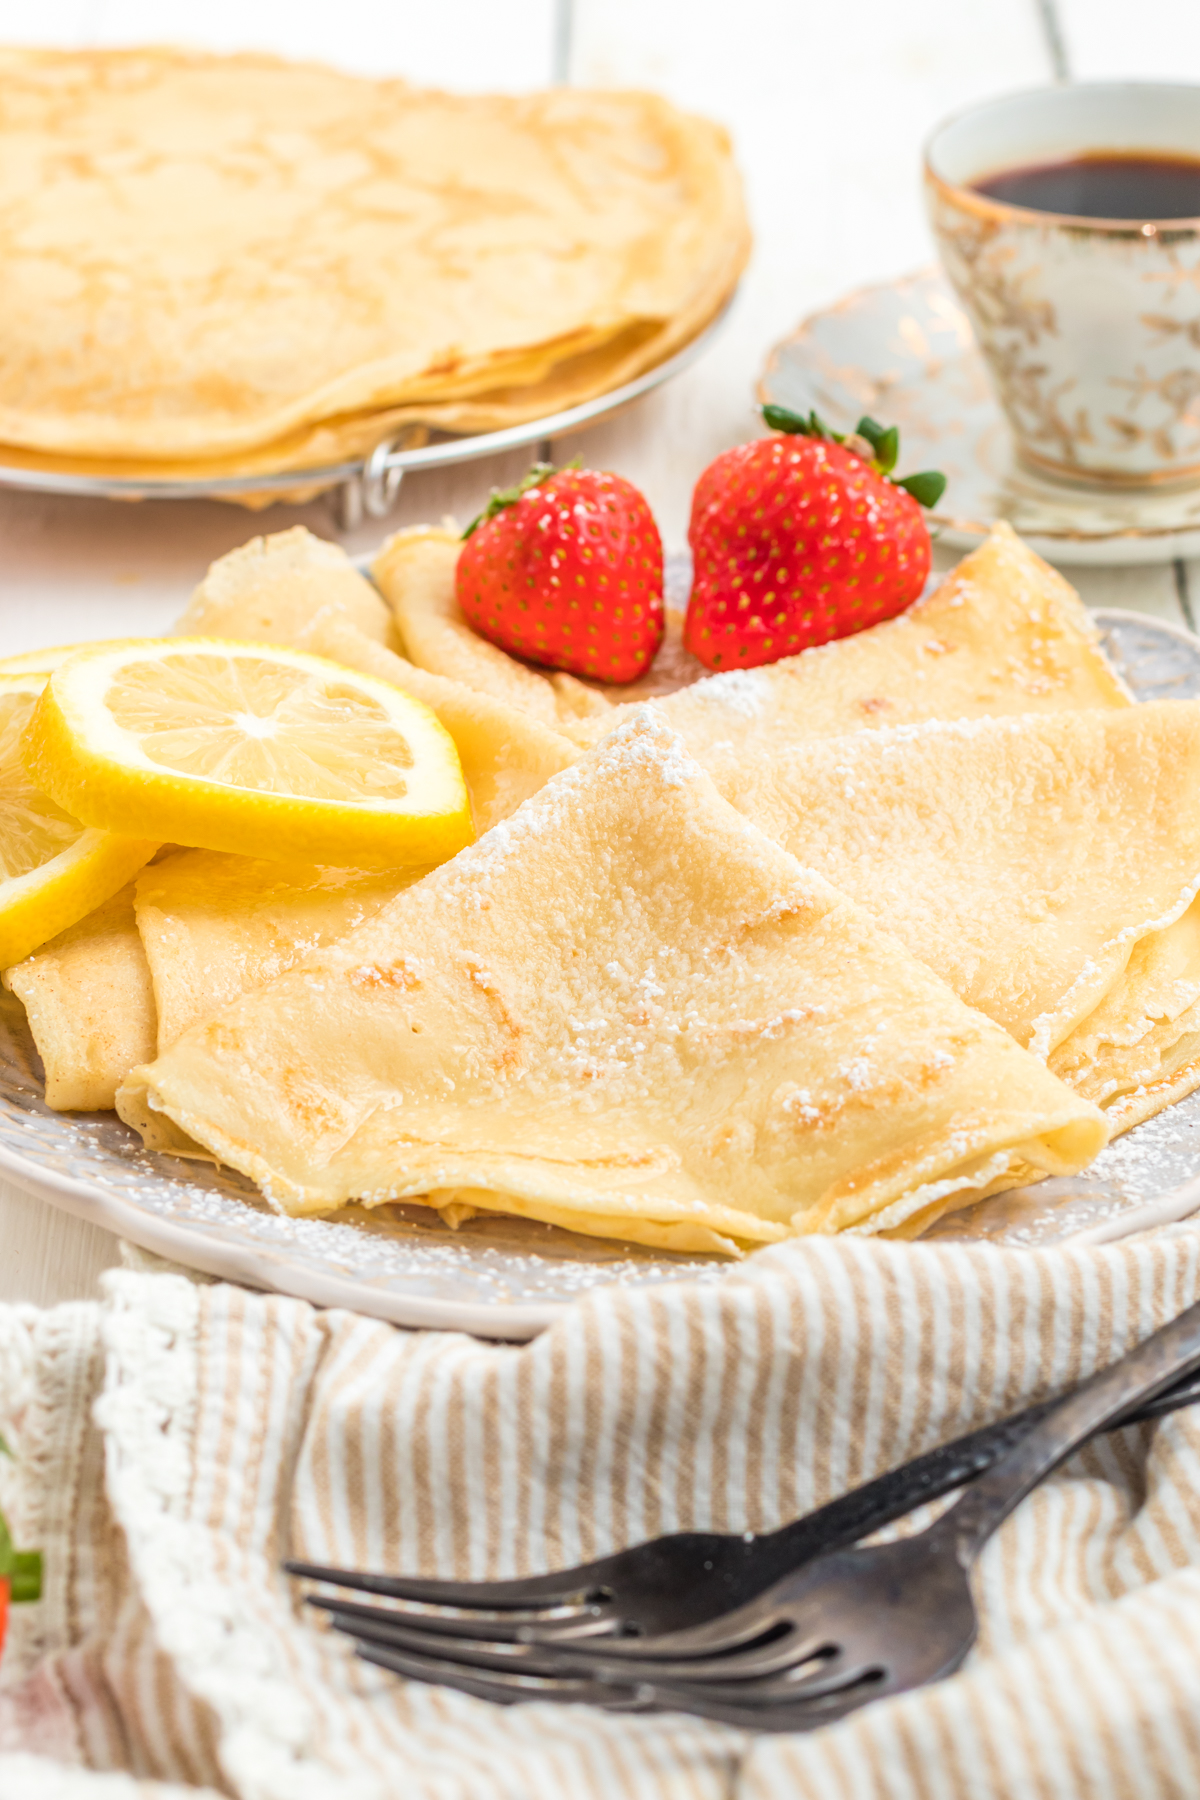 Parisian Crepes Will Make You the Star of Brunch - All You Need is Brunch